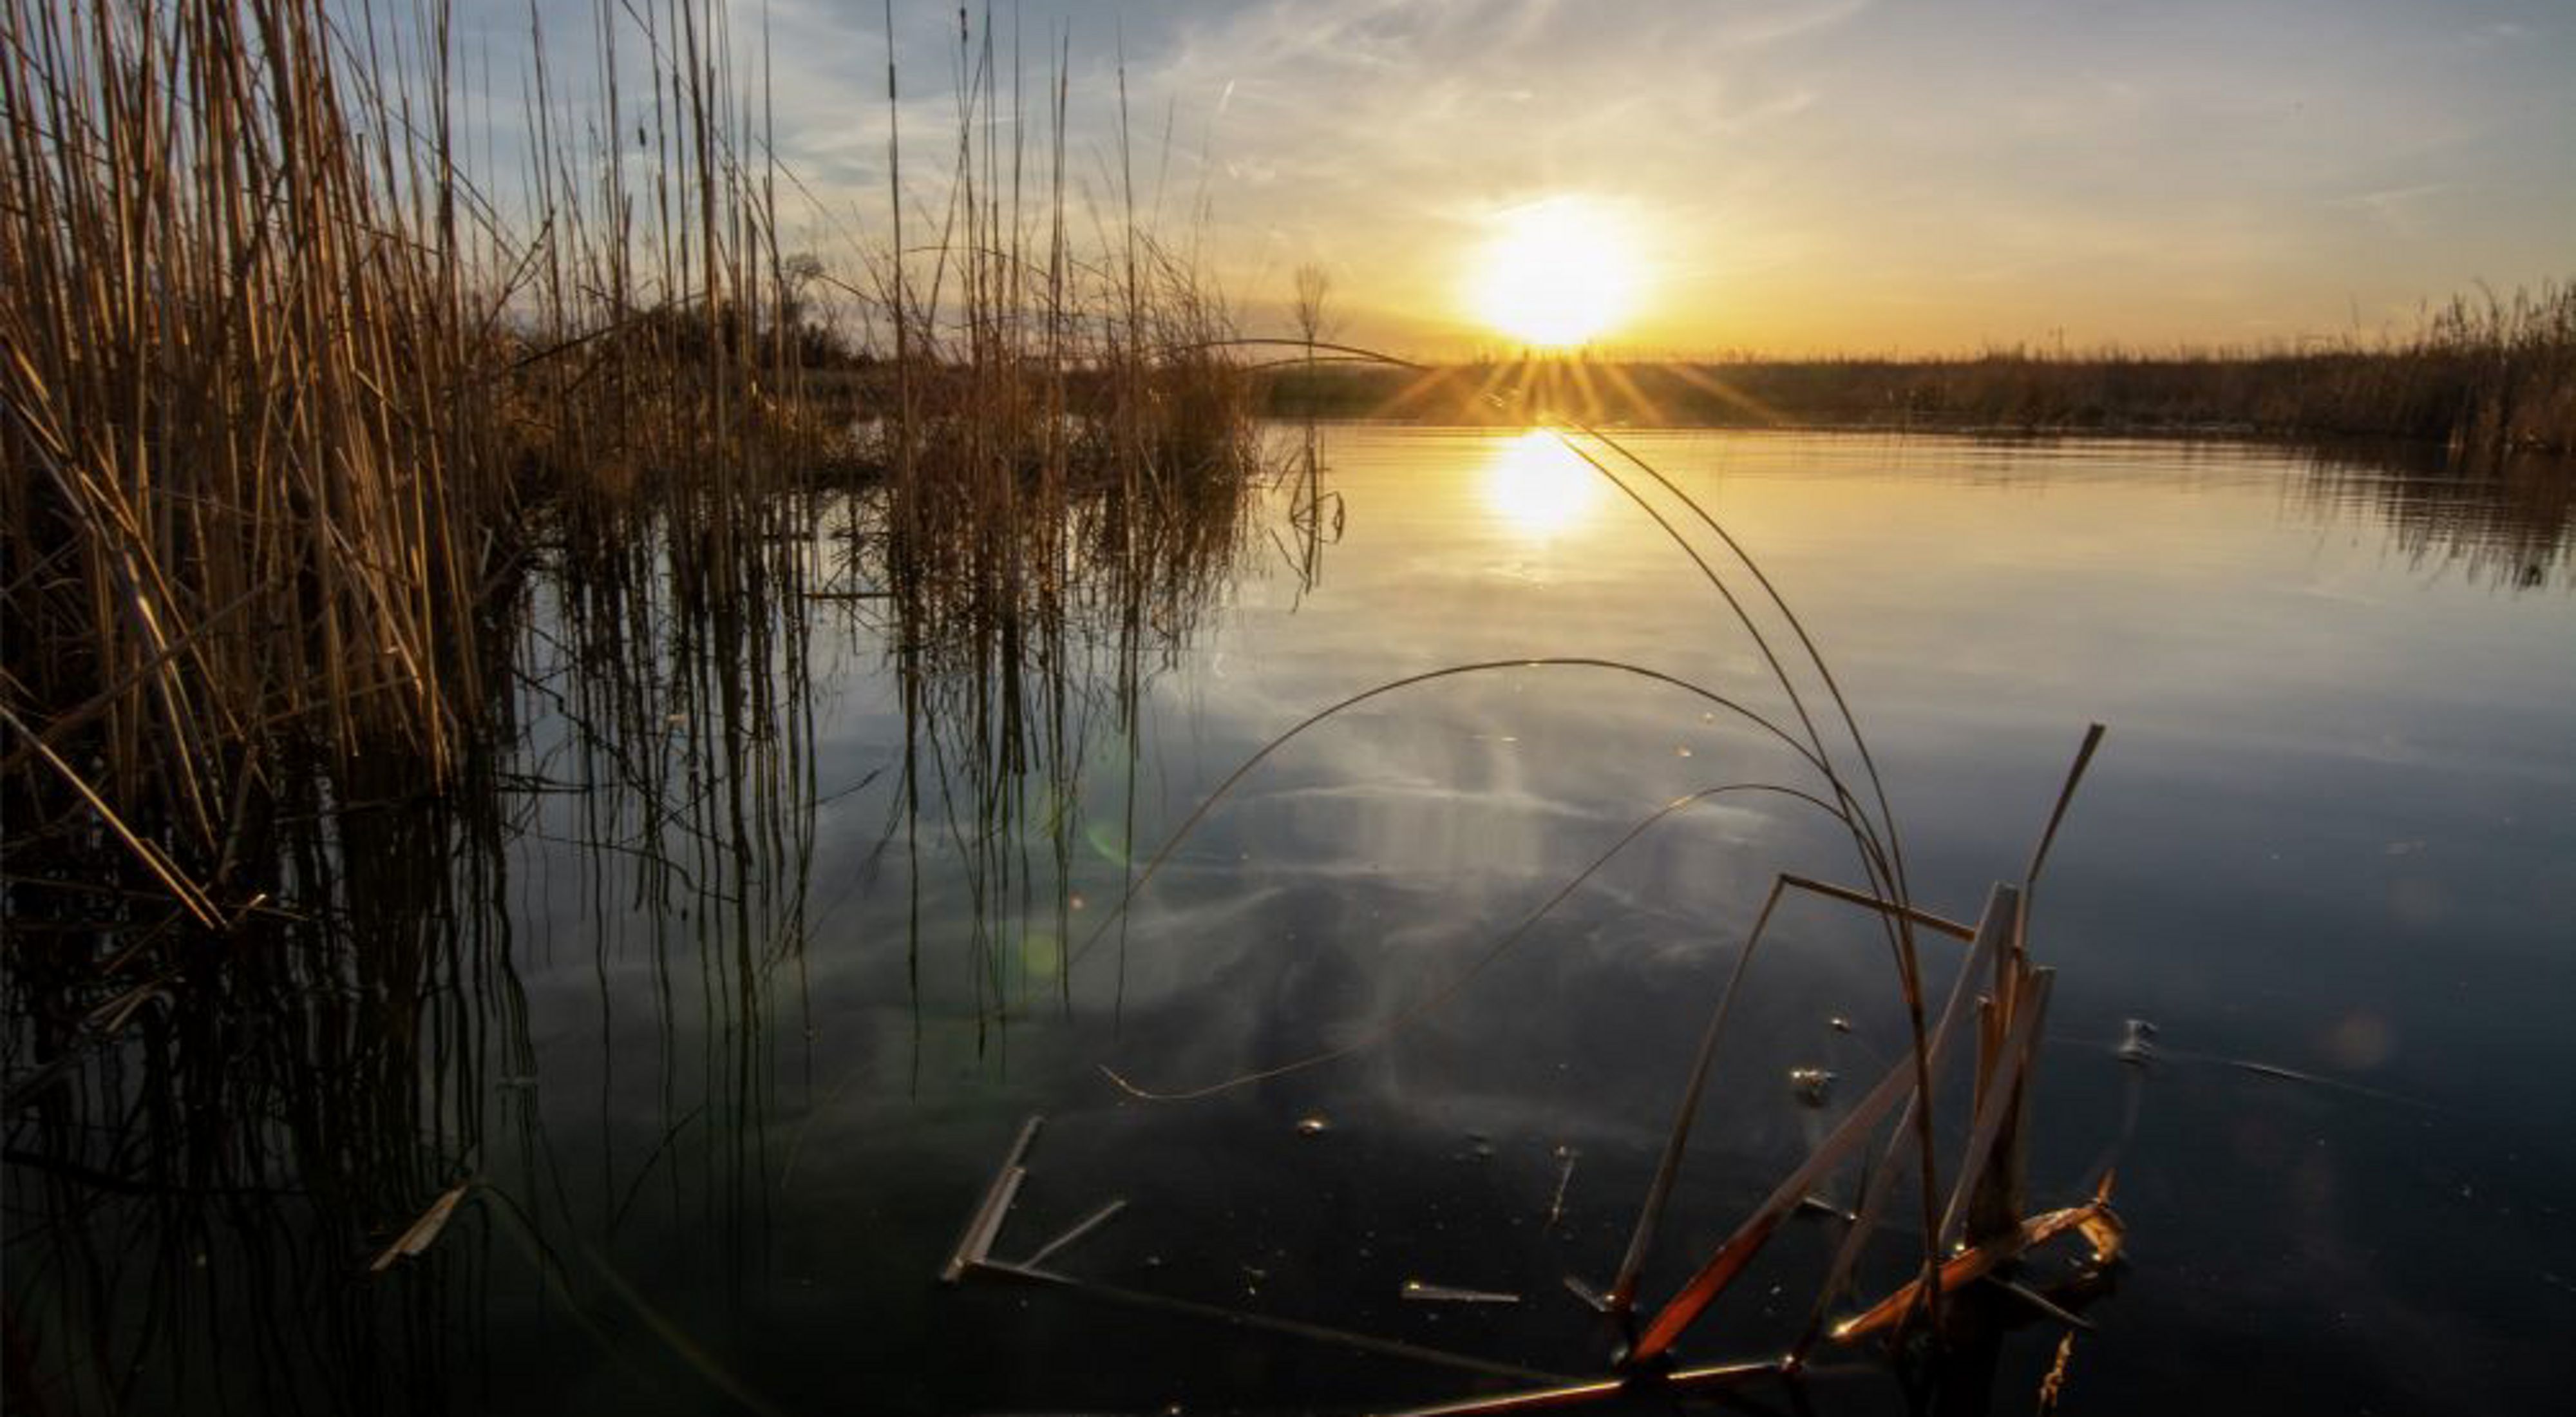 A sunset over a wetland with cattails.